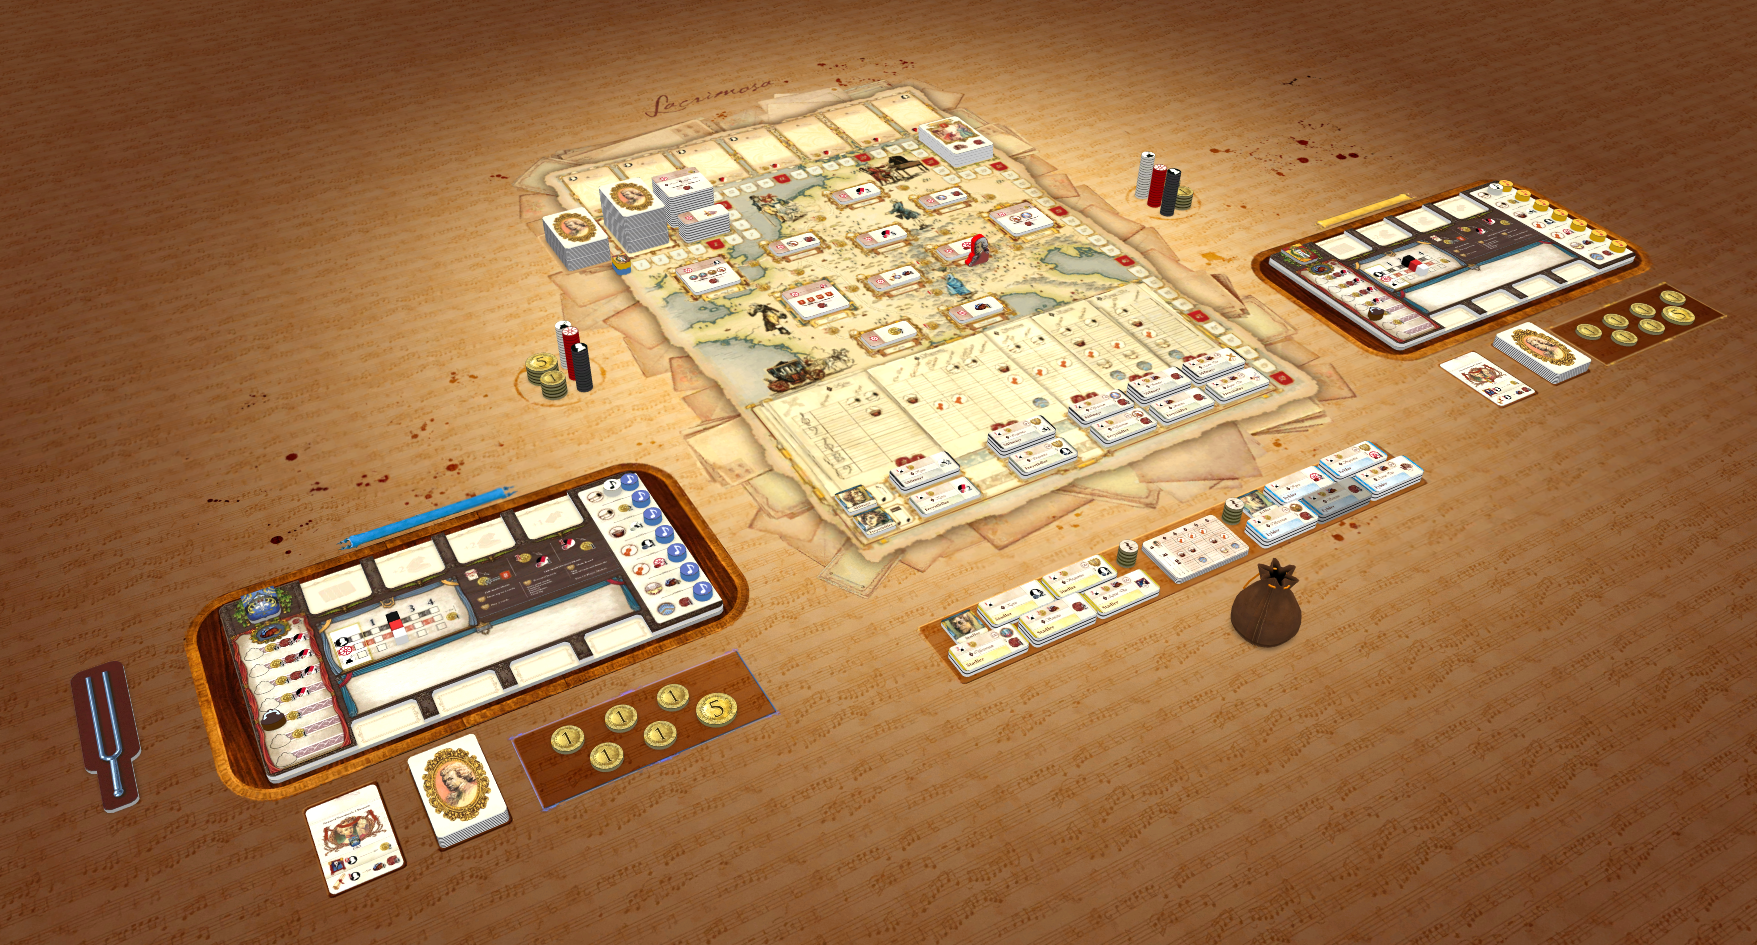 Connecting Accounts on Tabletopia with Steam – Tabletopia